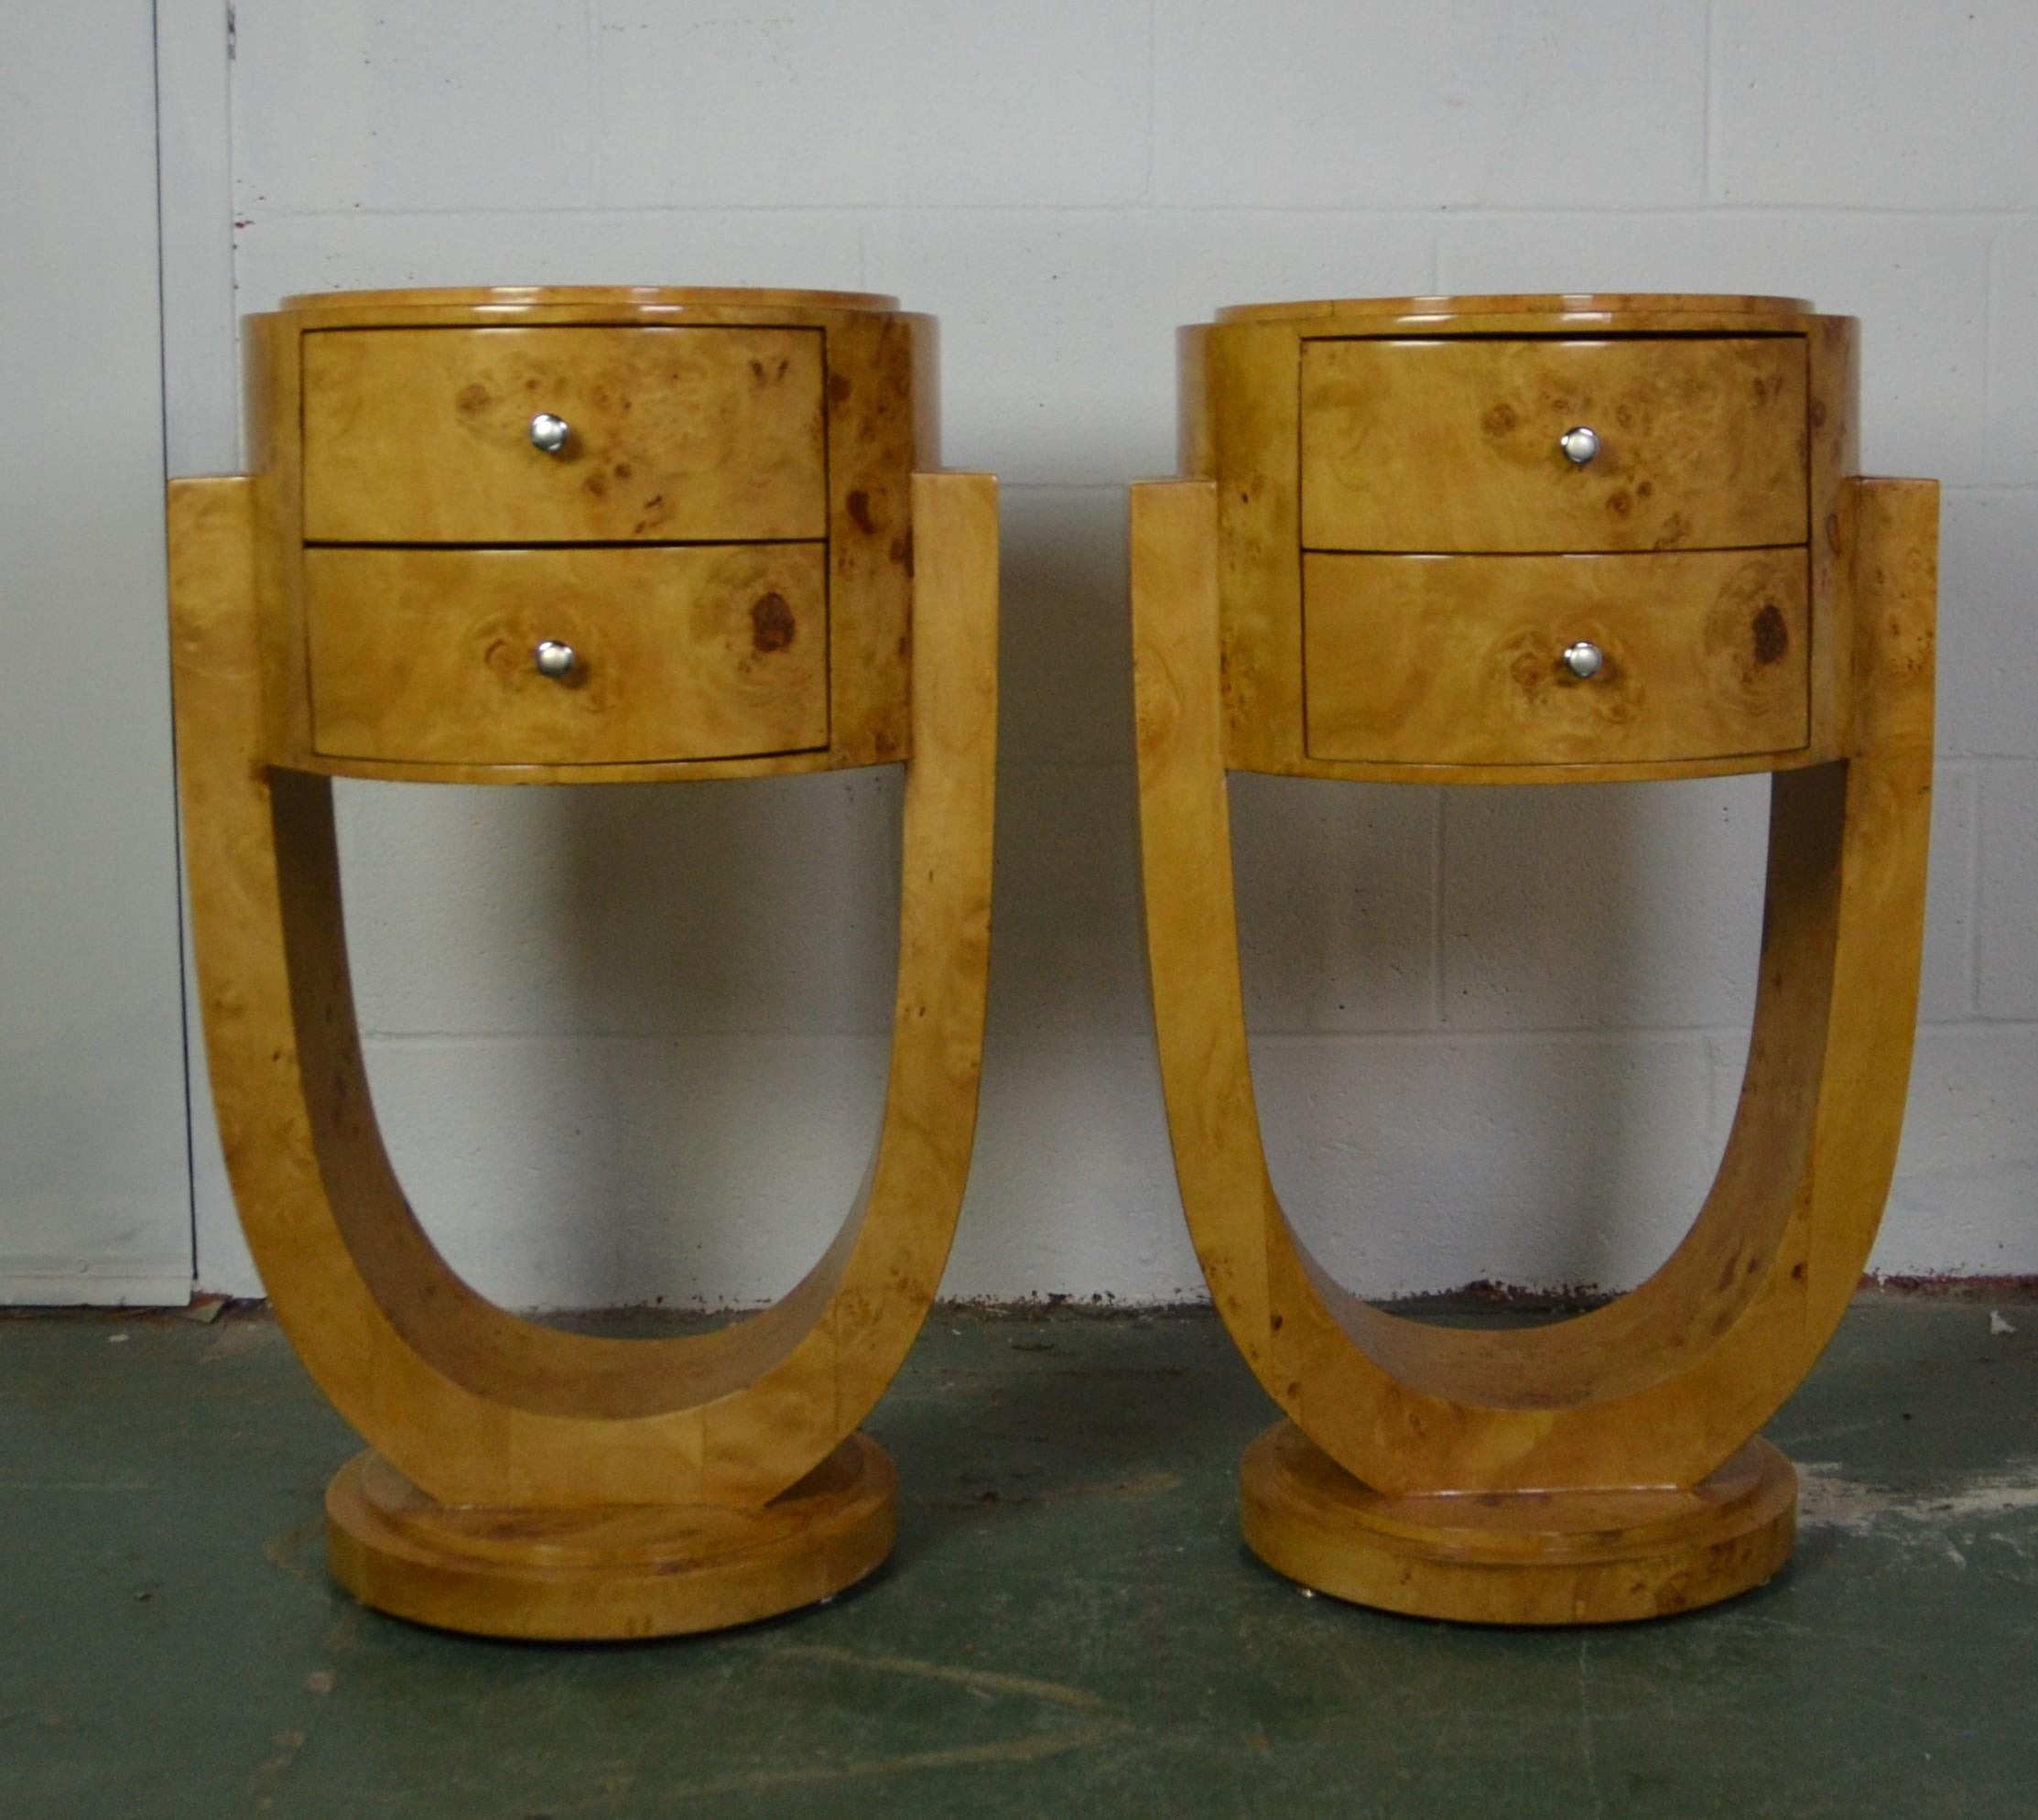 Pair of Art Deco style end table or nightstand with two drawers.